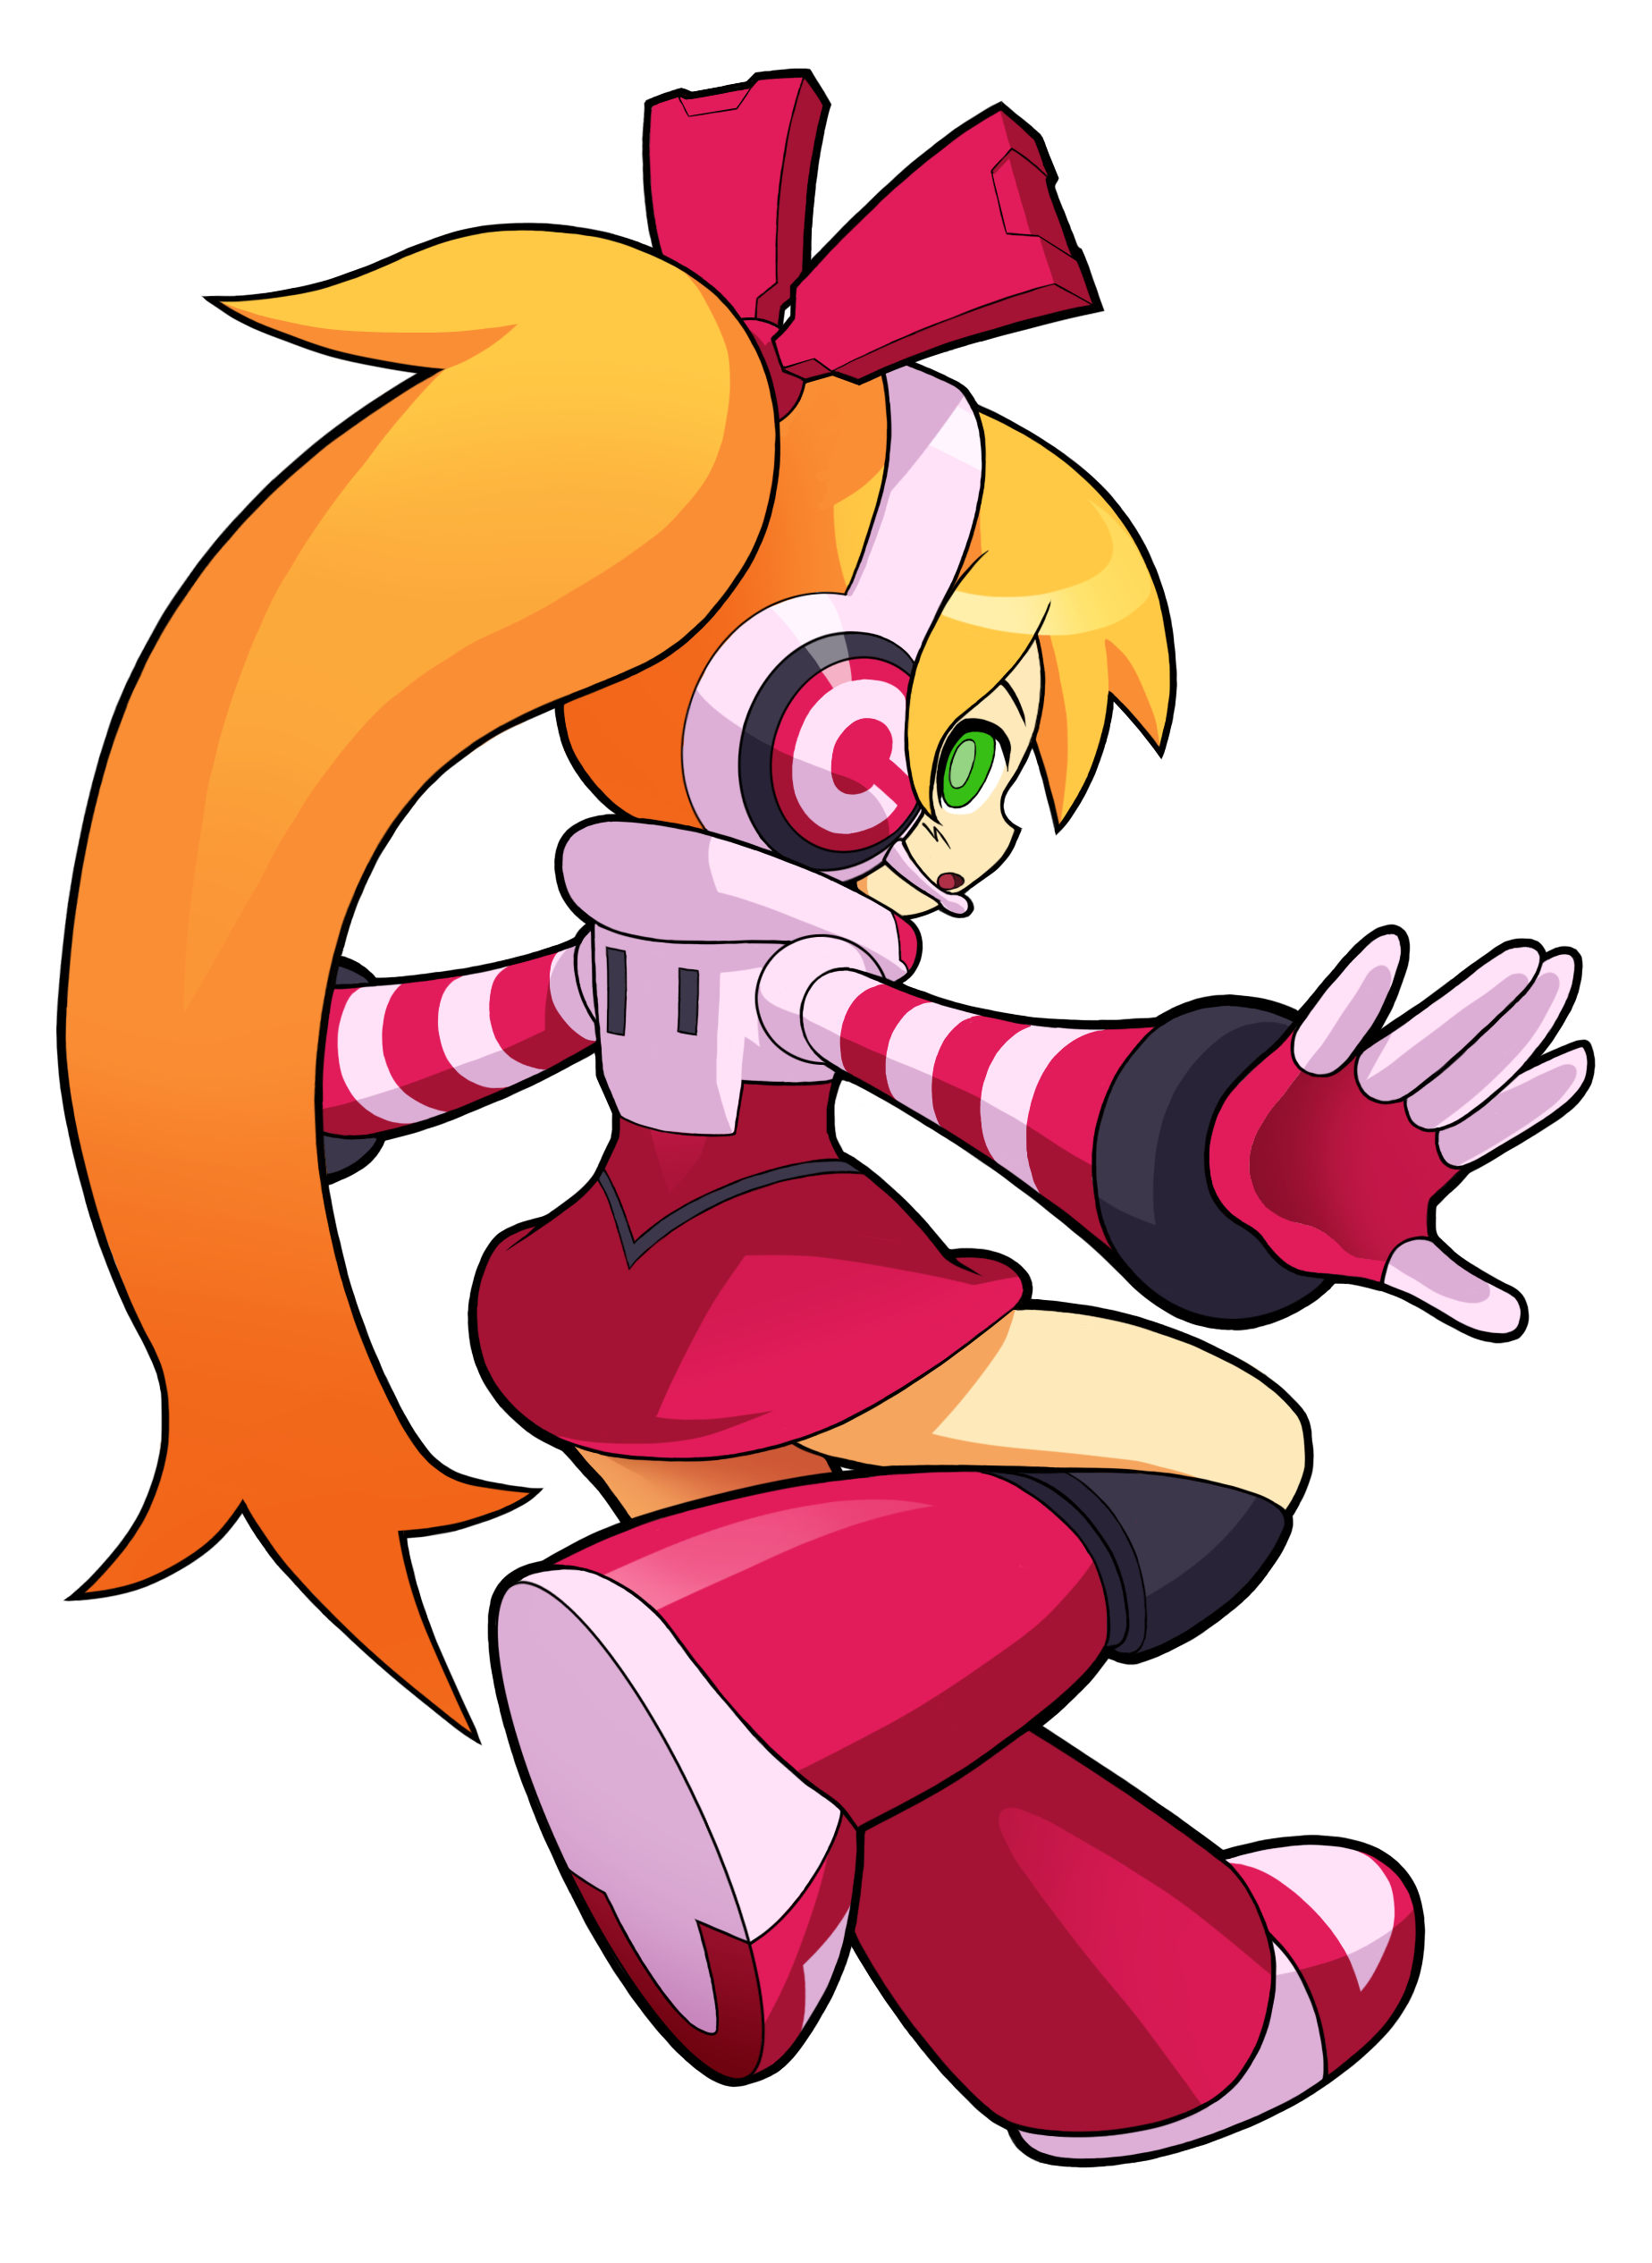 Image Call Artwork 3png Mighty No 9 Wiki Fandom Powered By Wikia 6397